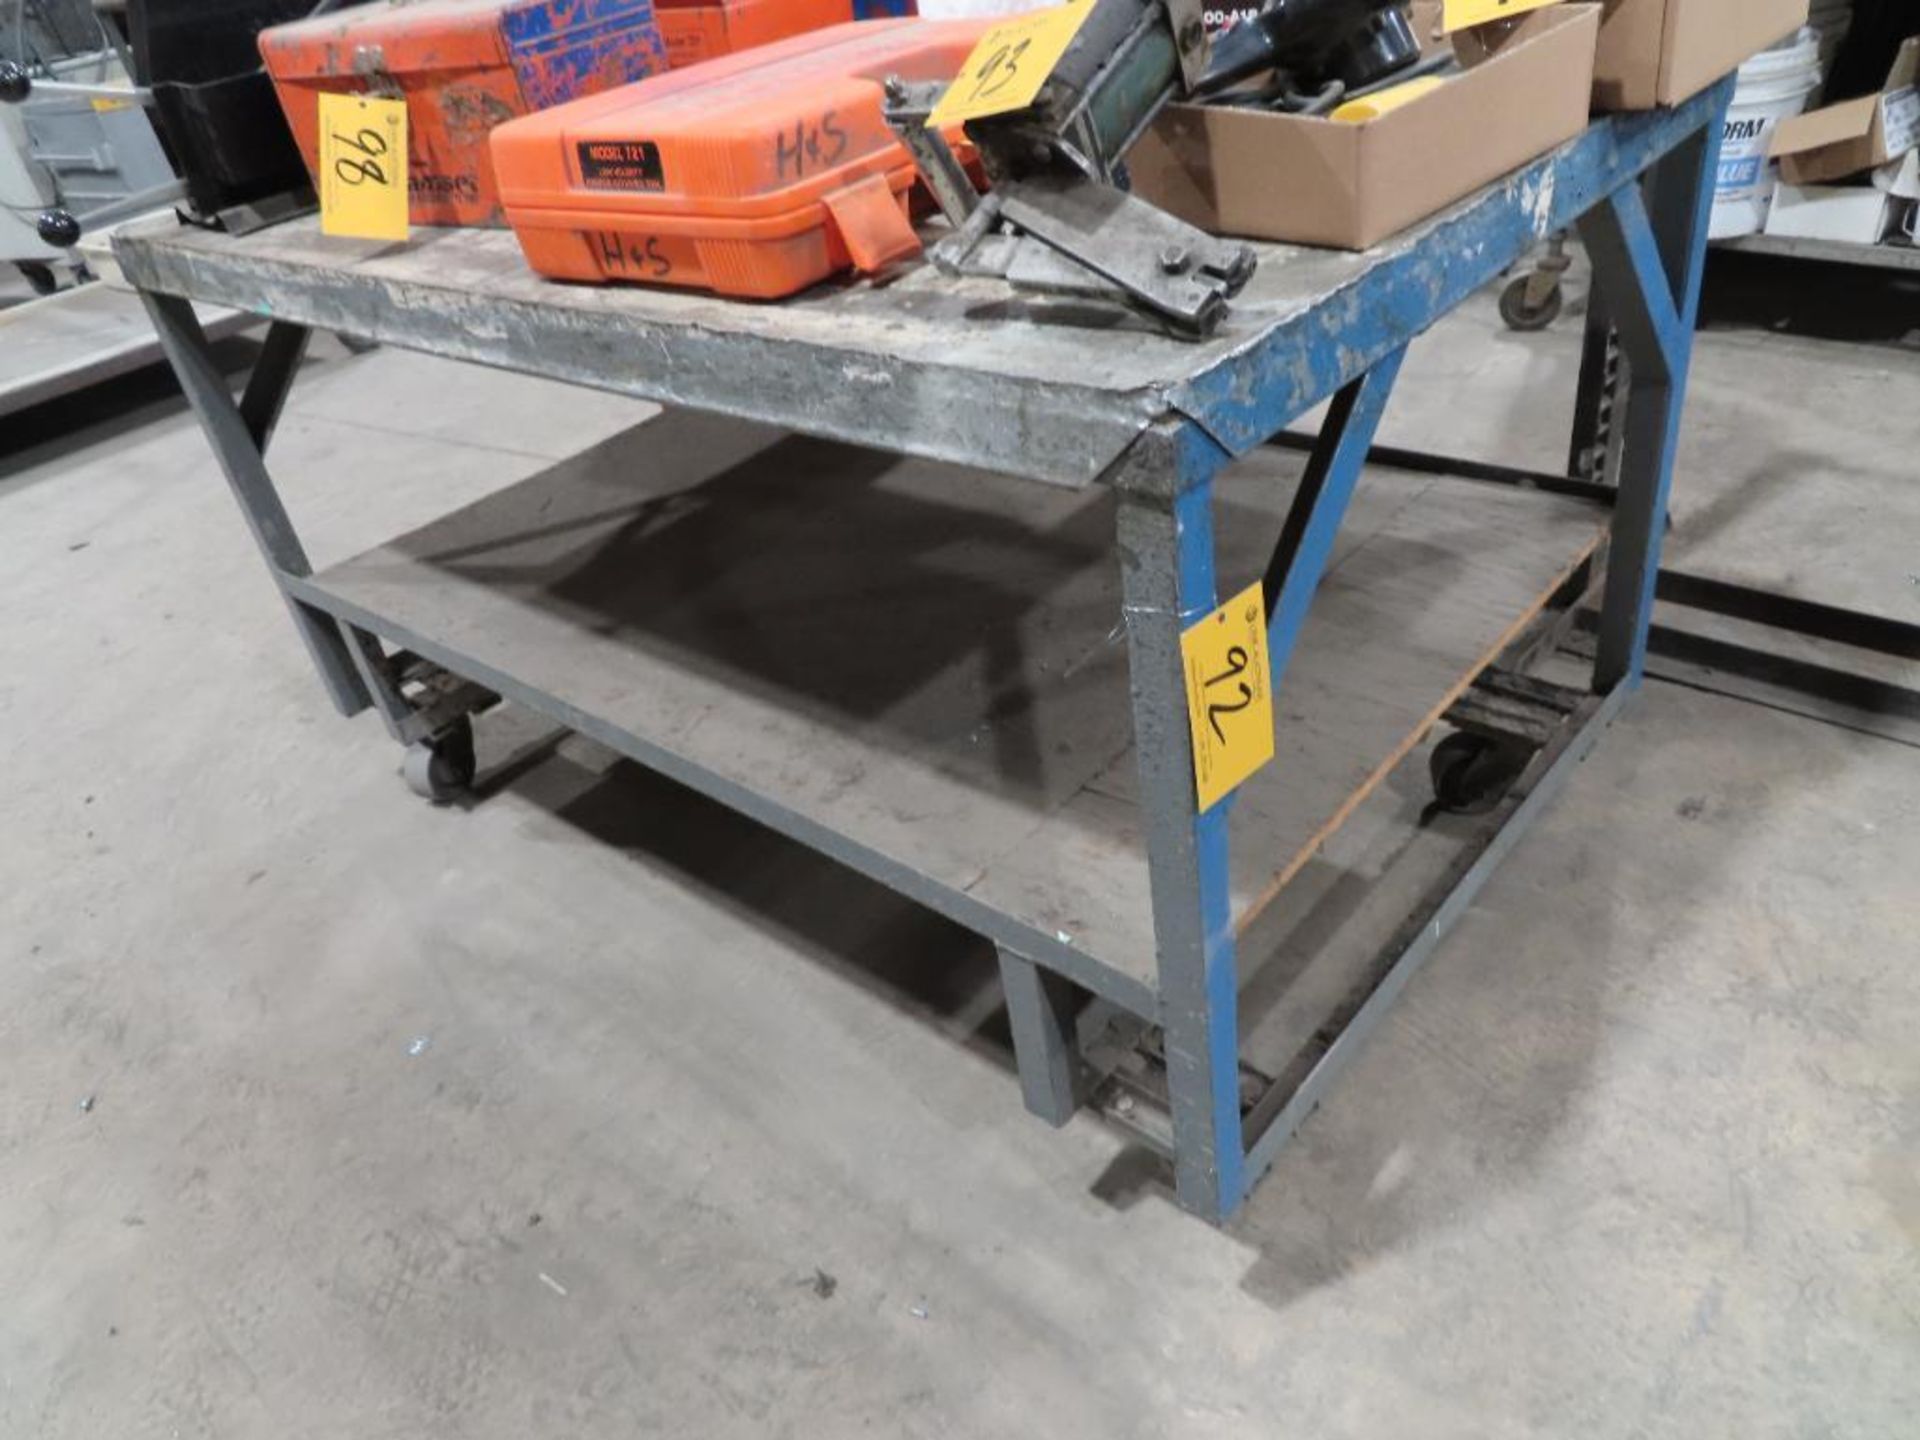 36" X 60" Rolling Steel Table (No Contents)